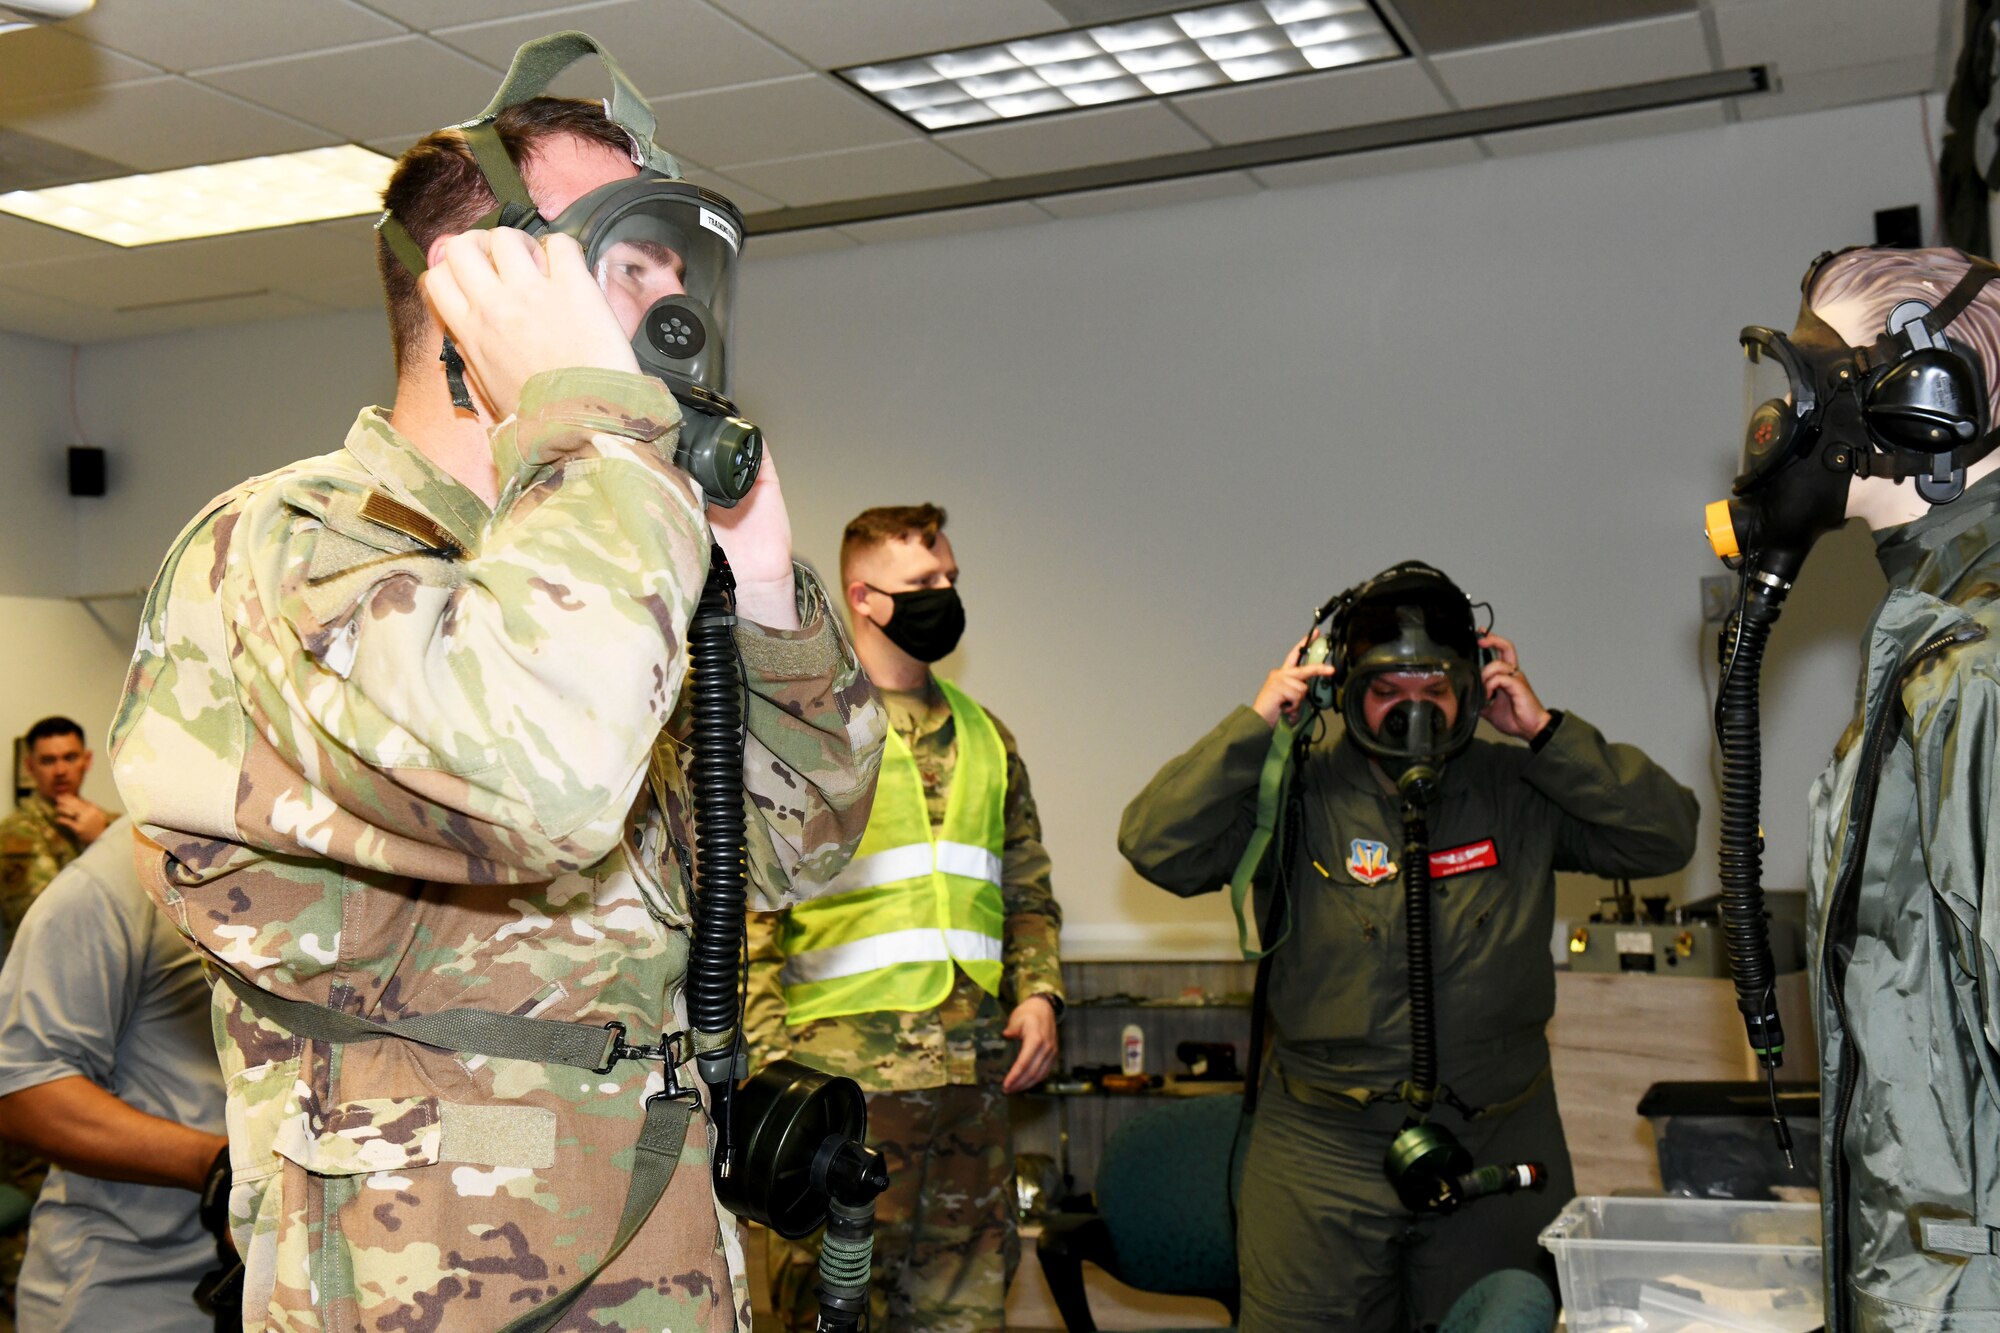 Photo shows two individuals putting on masks.